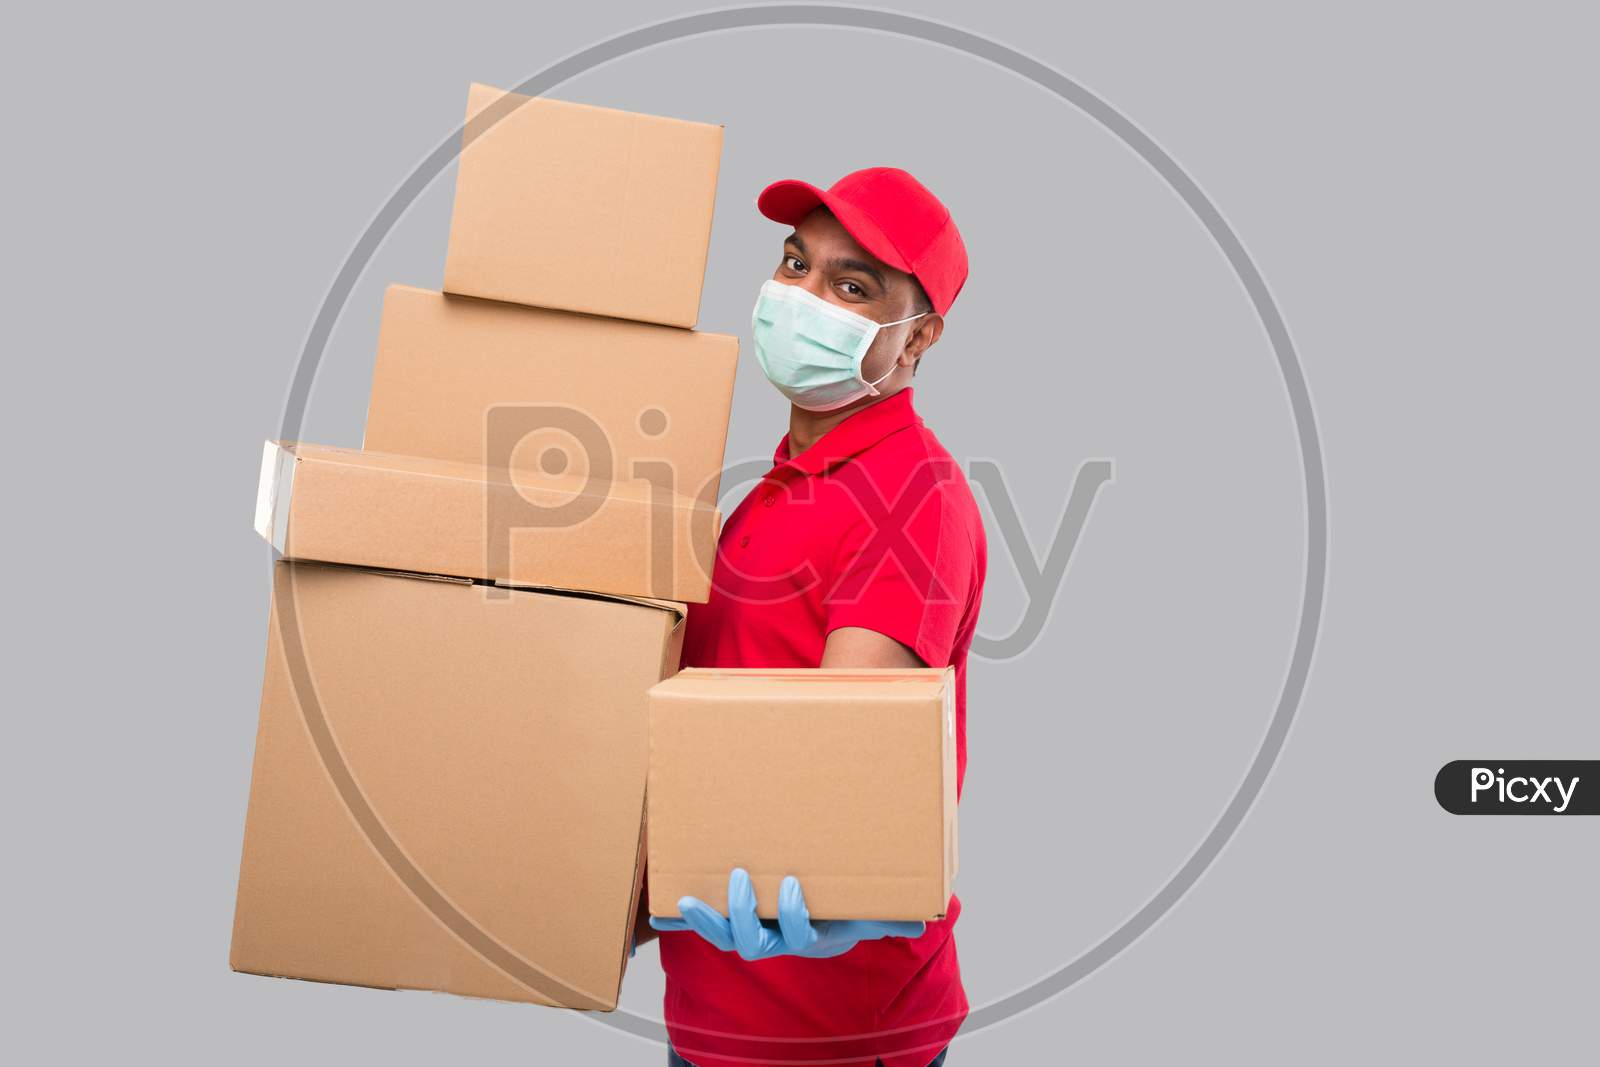 Delivery Man Holding A Lot Carton Boxes Wearing Medical Mask And Gloves Isolated. Indian Delivery Boy Overloaded With Boxes. Gives Out Box To Client